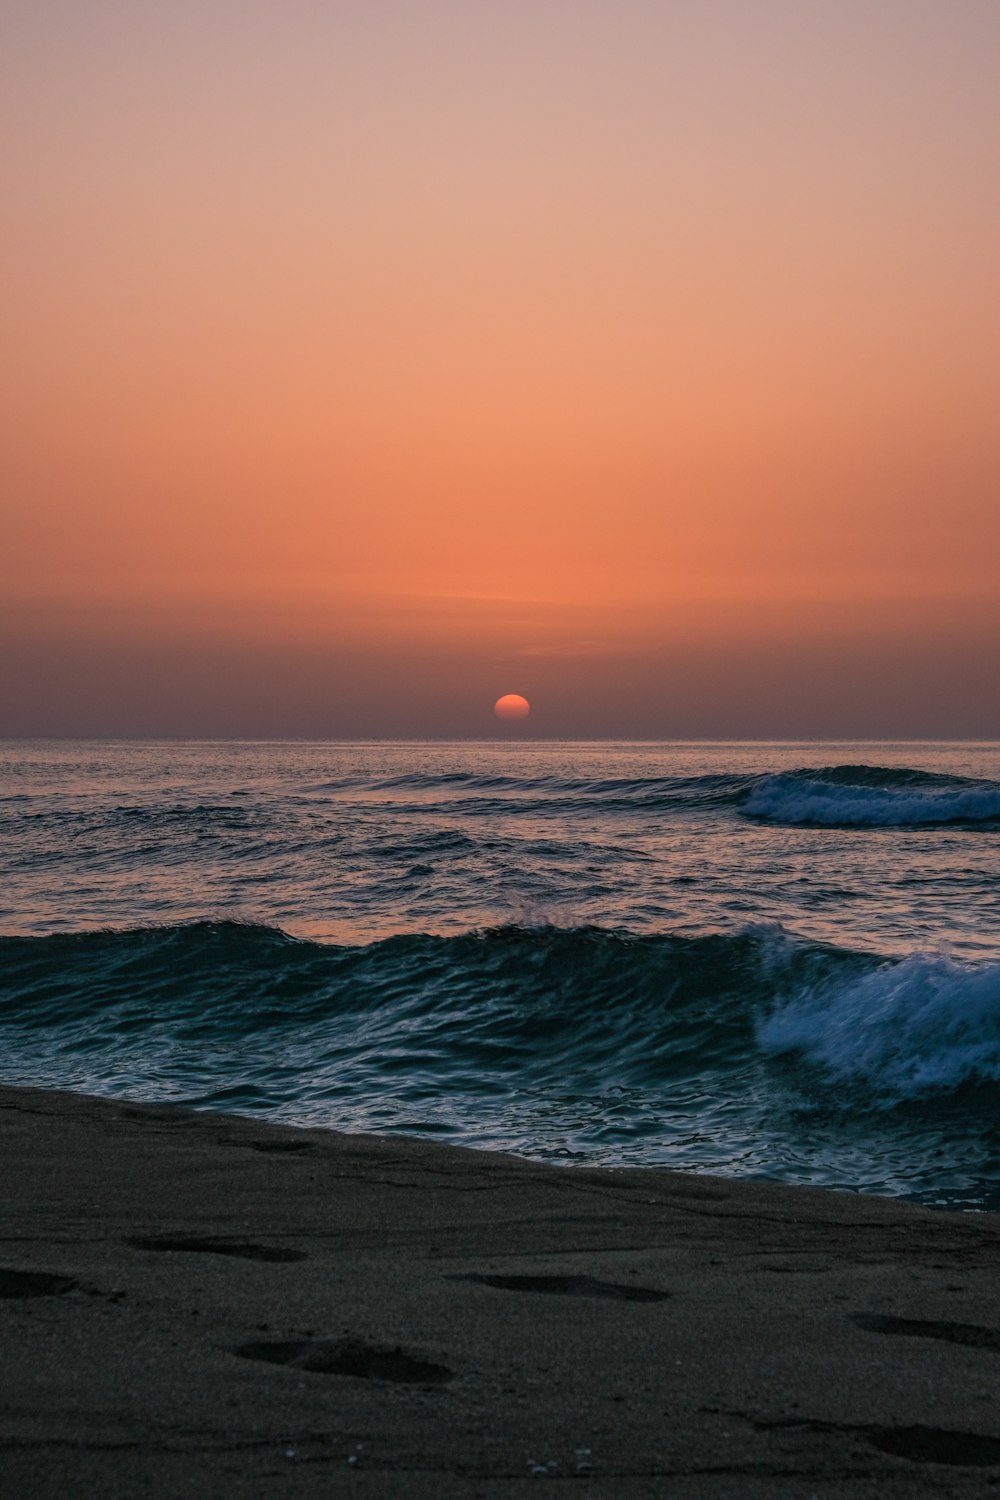 the sun is setting over the ocean with waves